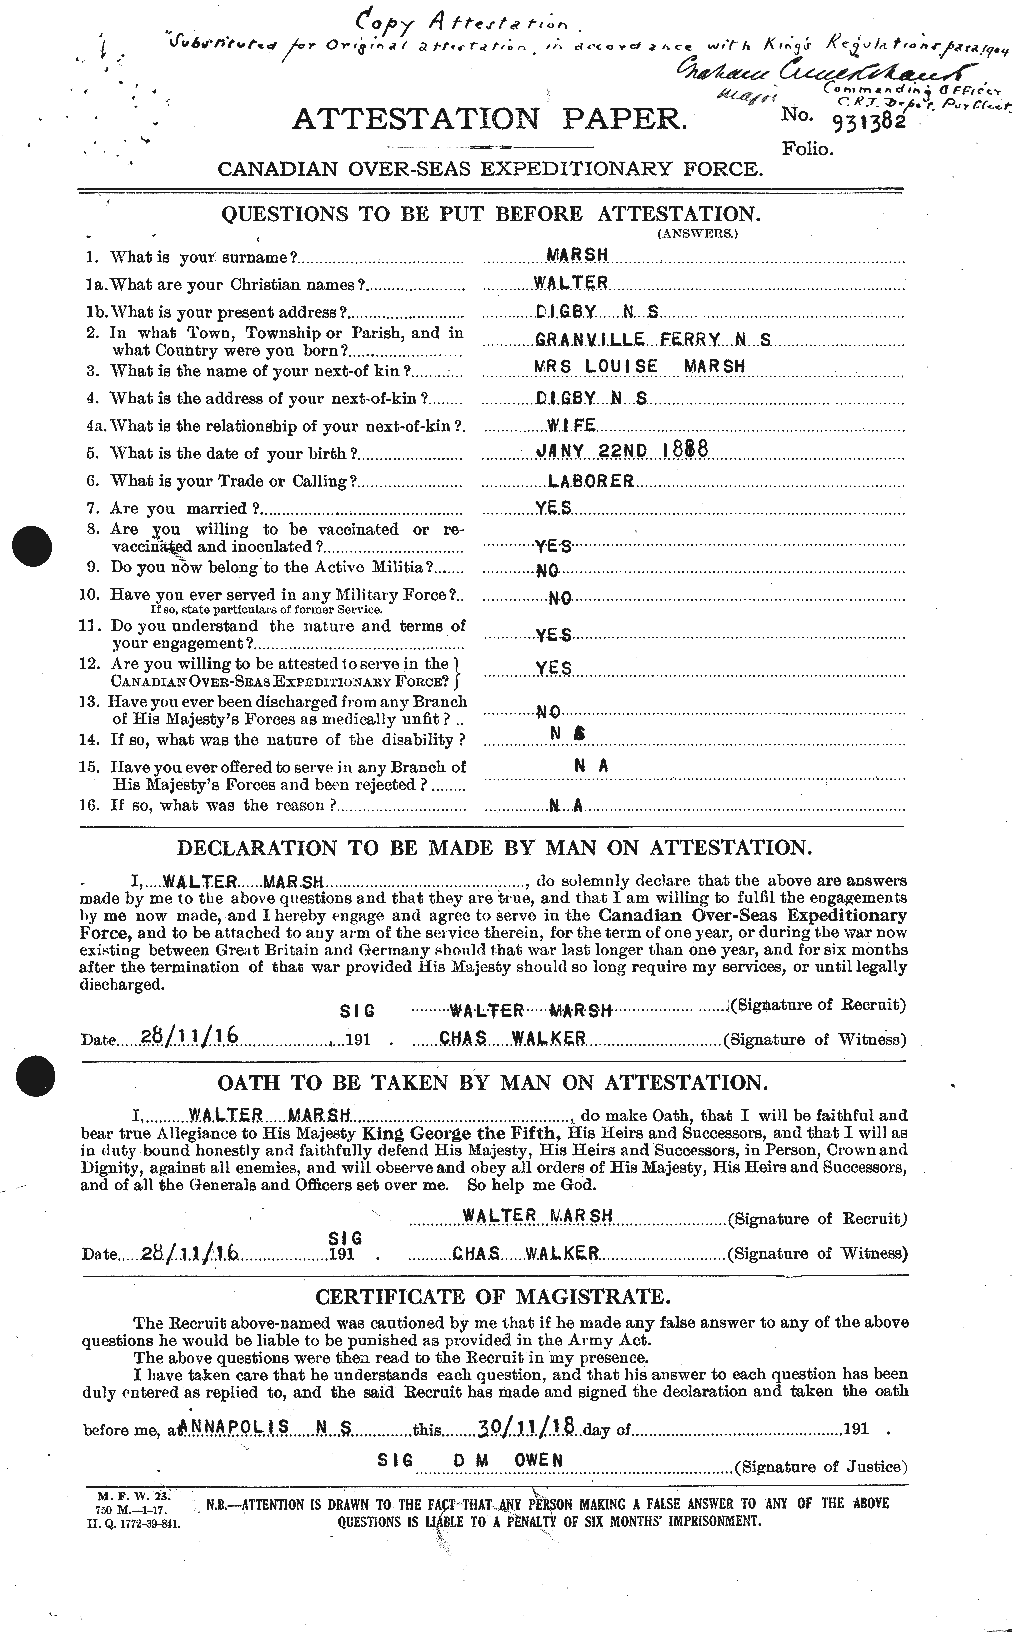 Personnel Records of the First World War - CEF 495647a